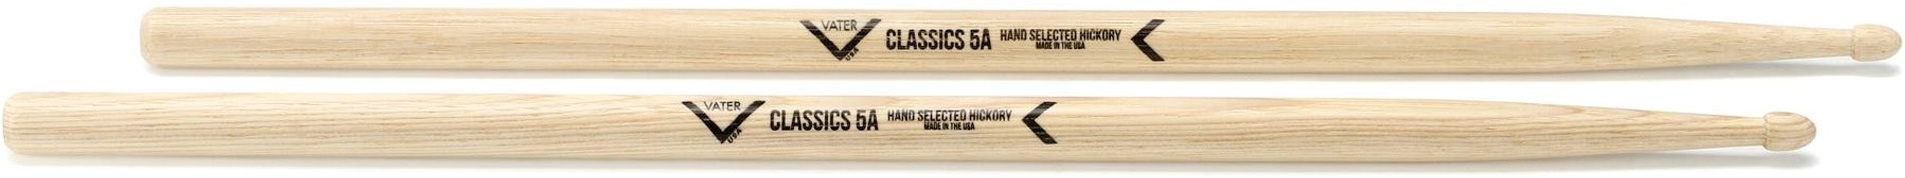 Vater Hickory Classics 5a - Stöcke - Main picture